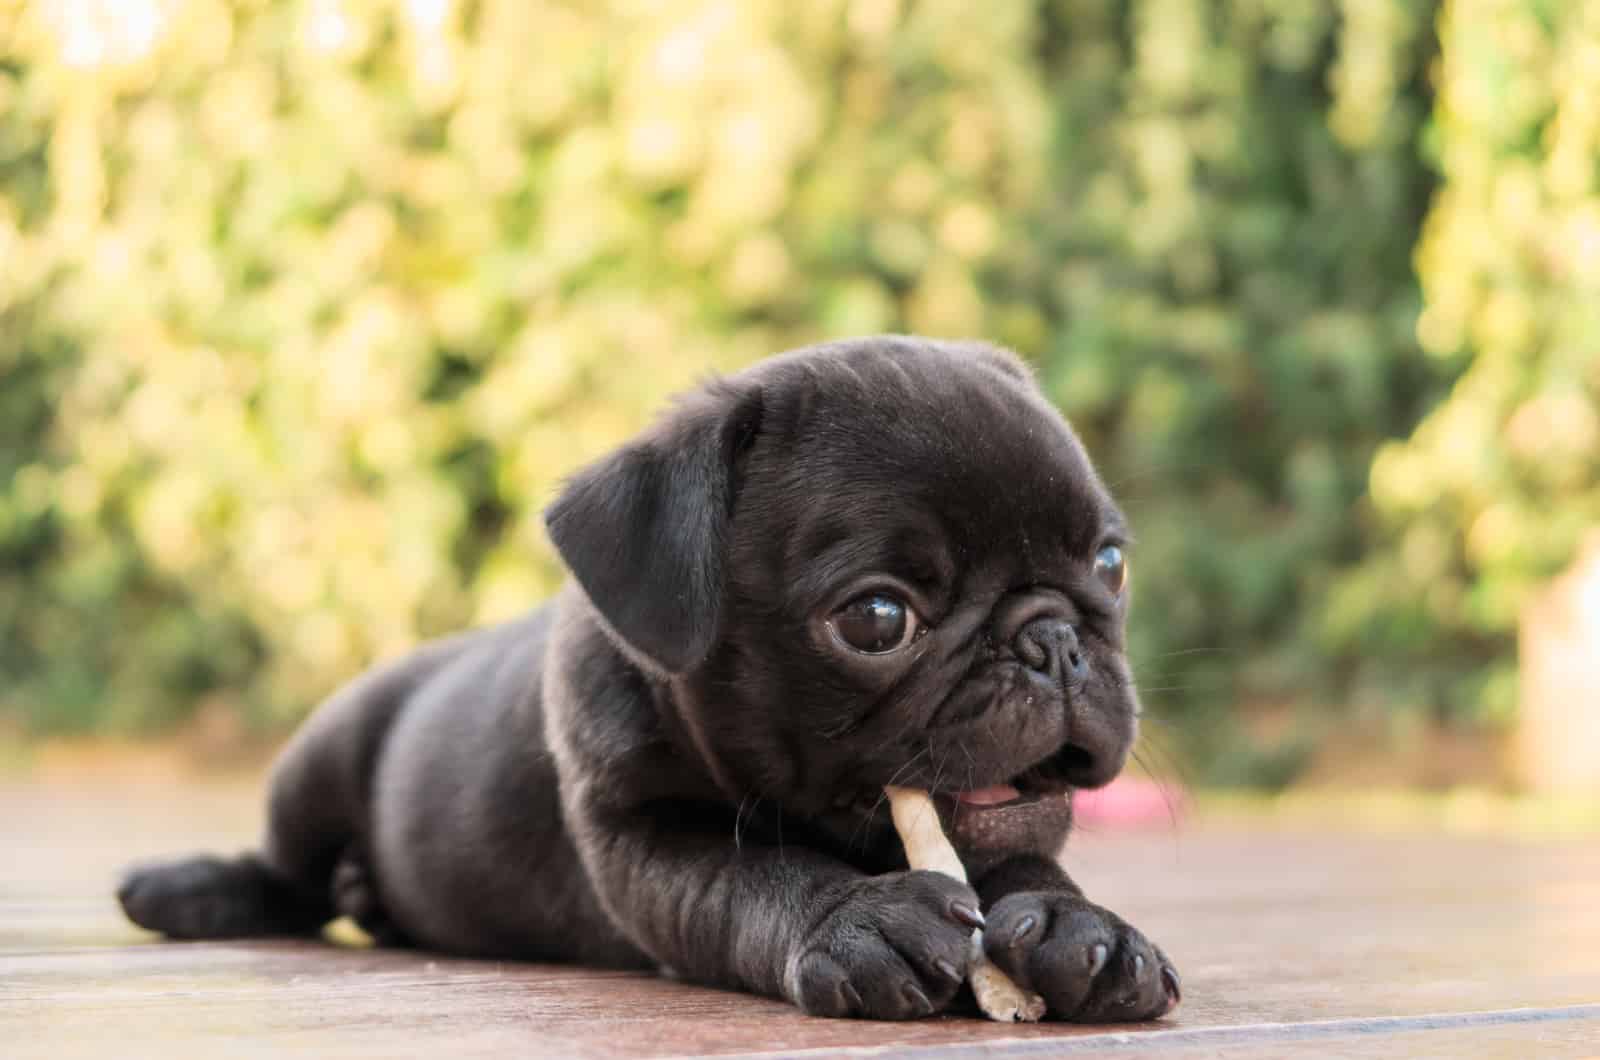 Pugs lie down and nibble on a treat